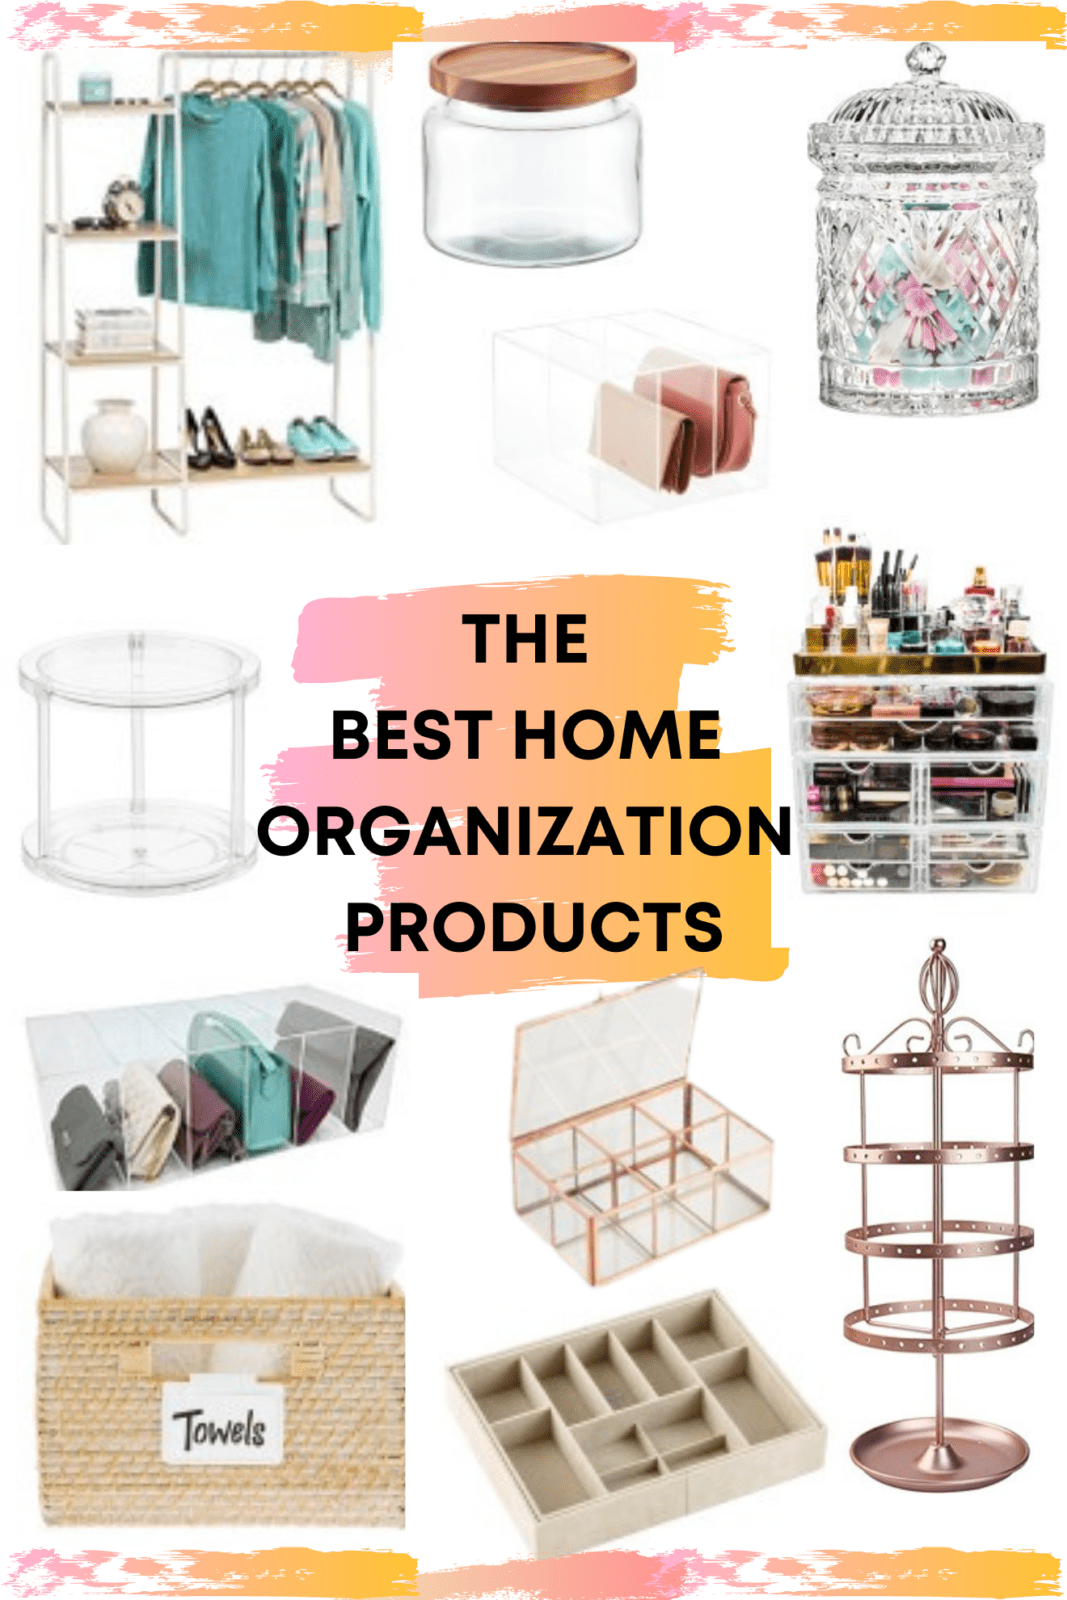 https://www.lauralily.com/wp-content/uploads/2020/12/Best-Home-Organiation-Products.png